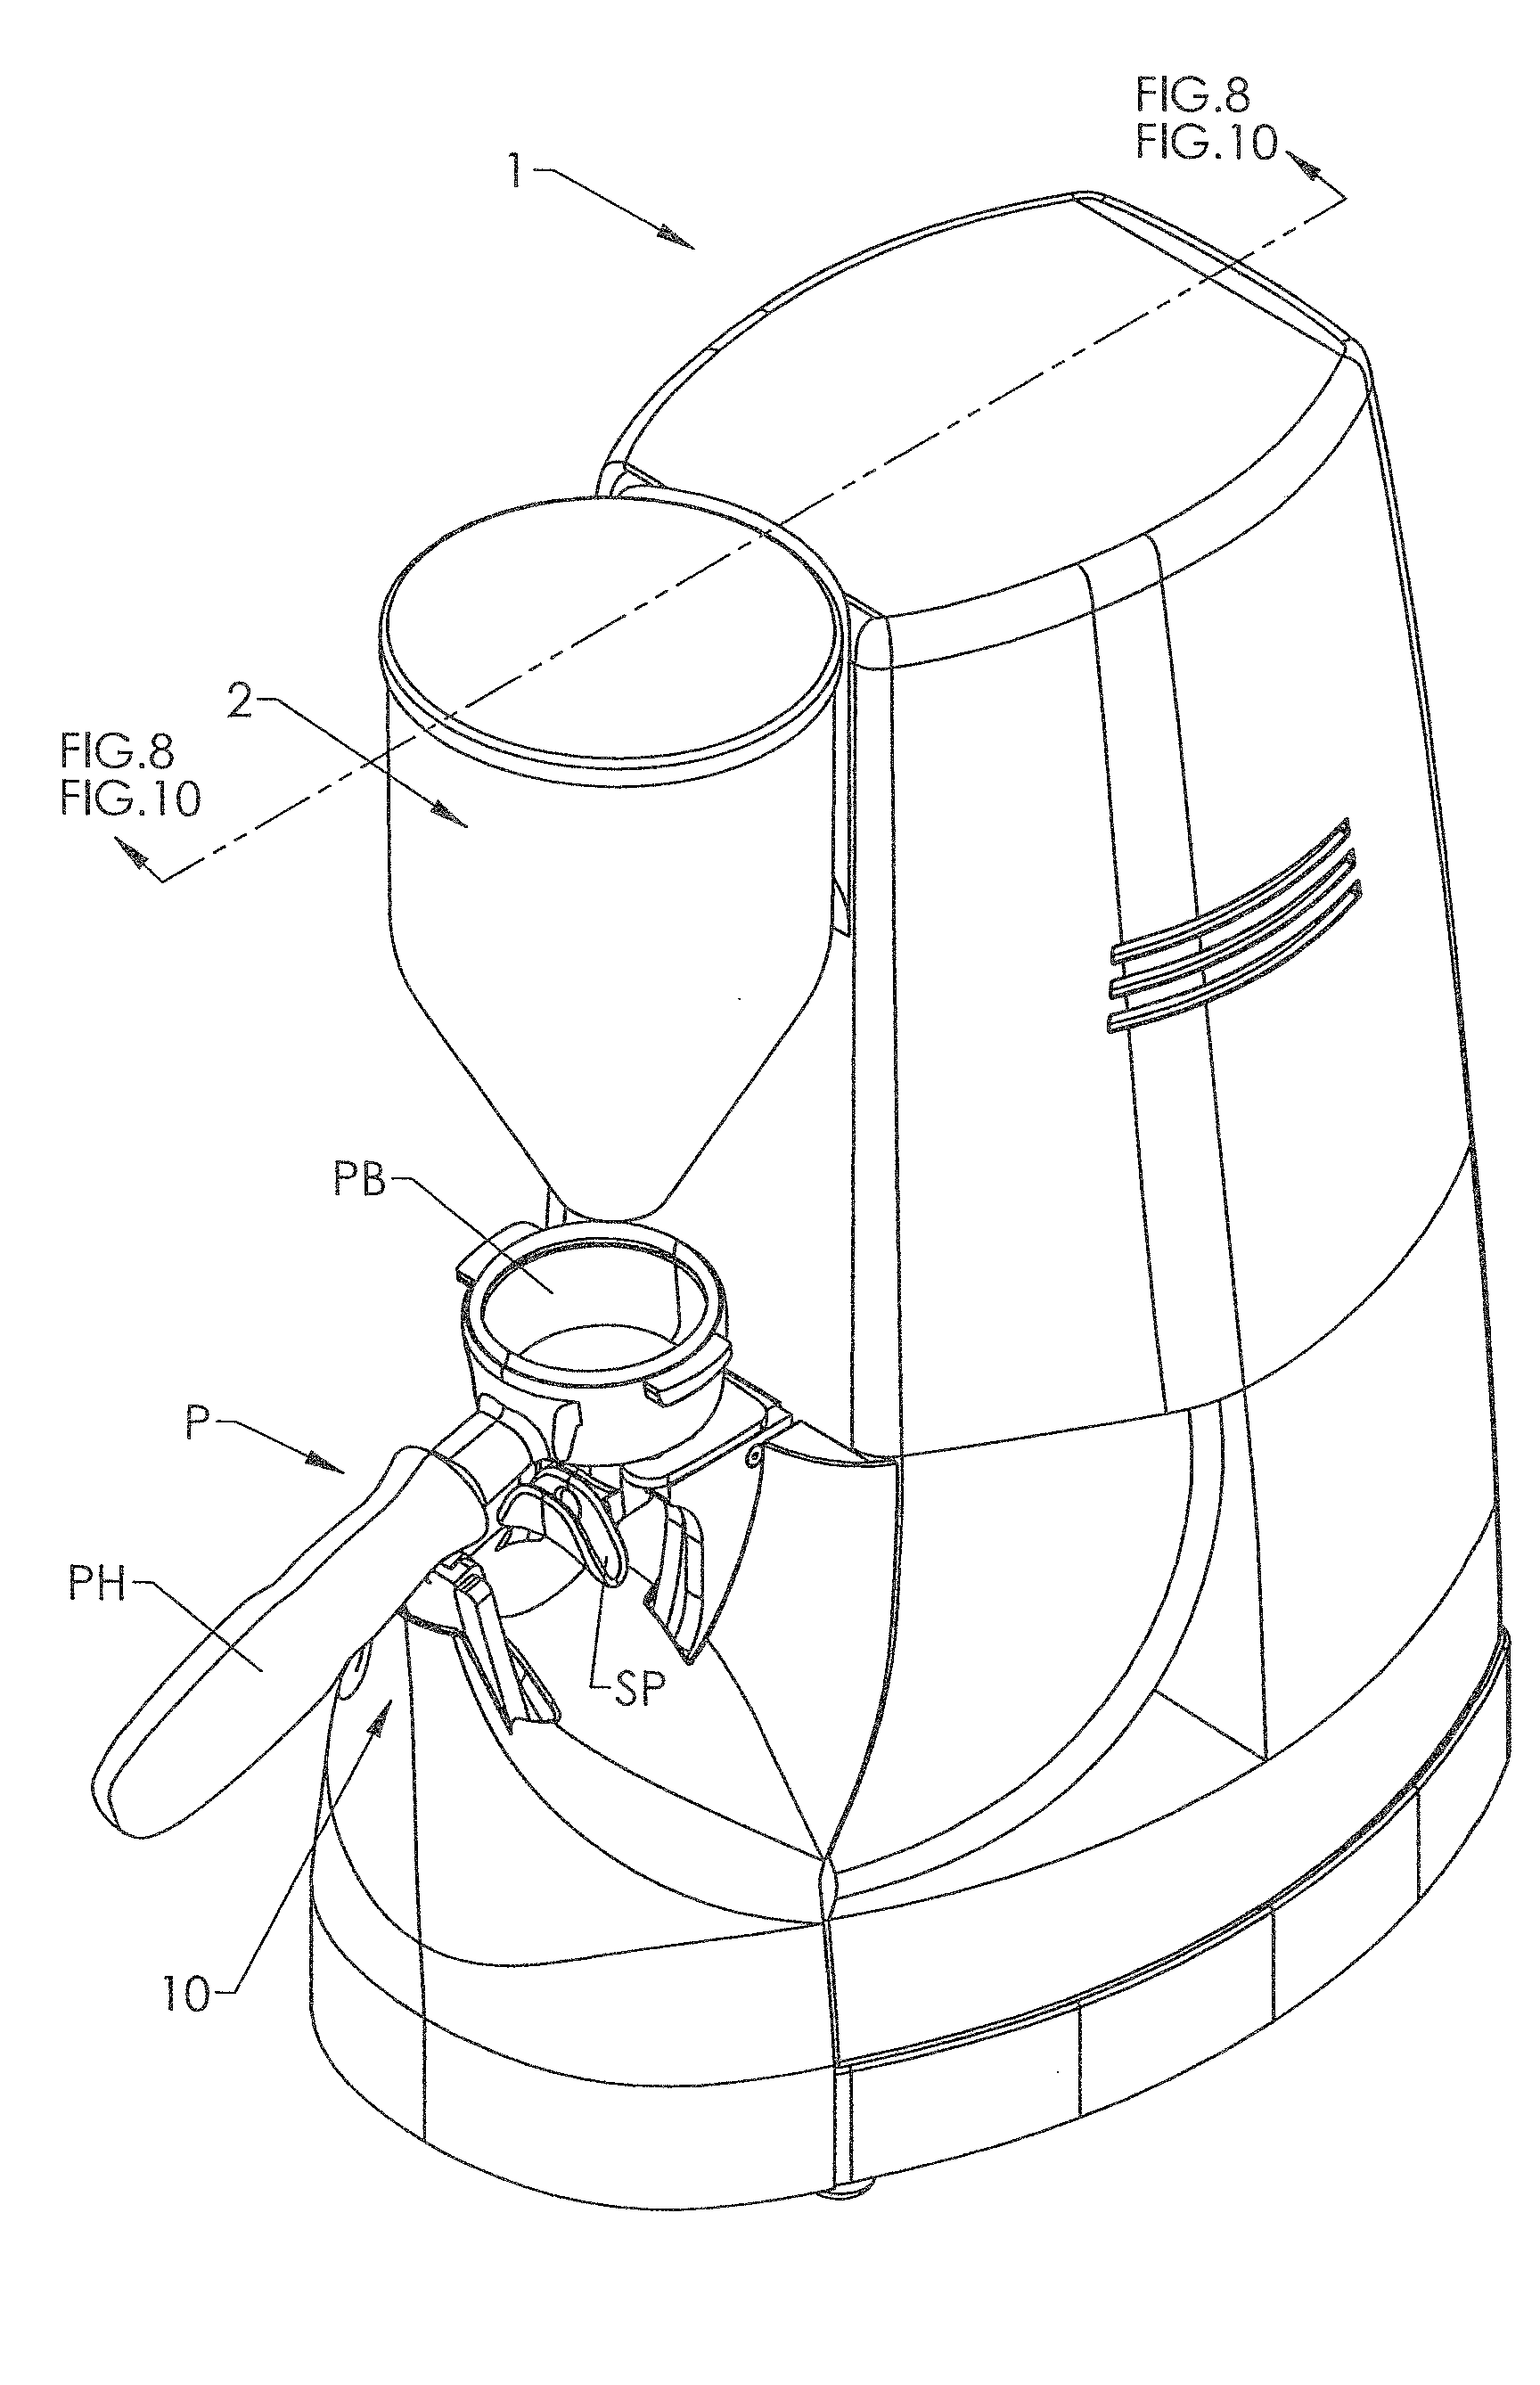 Portafilter and grounds weighing platform system and methods of use